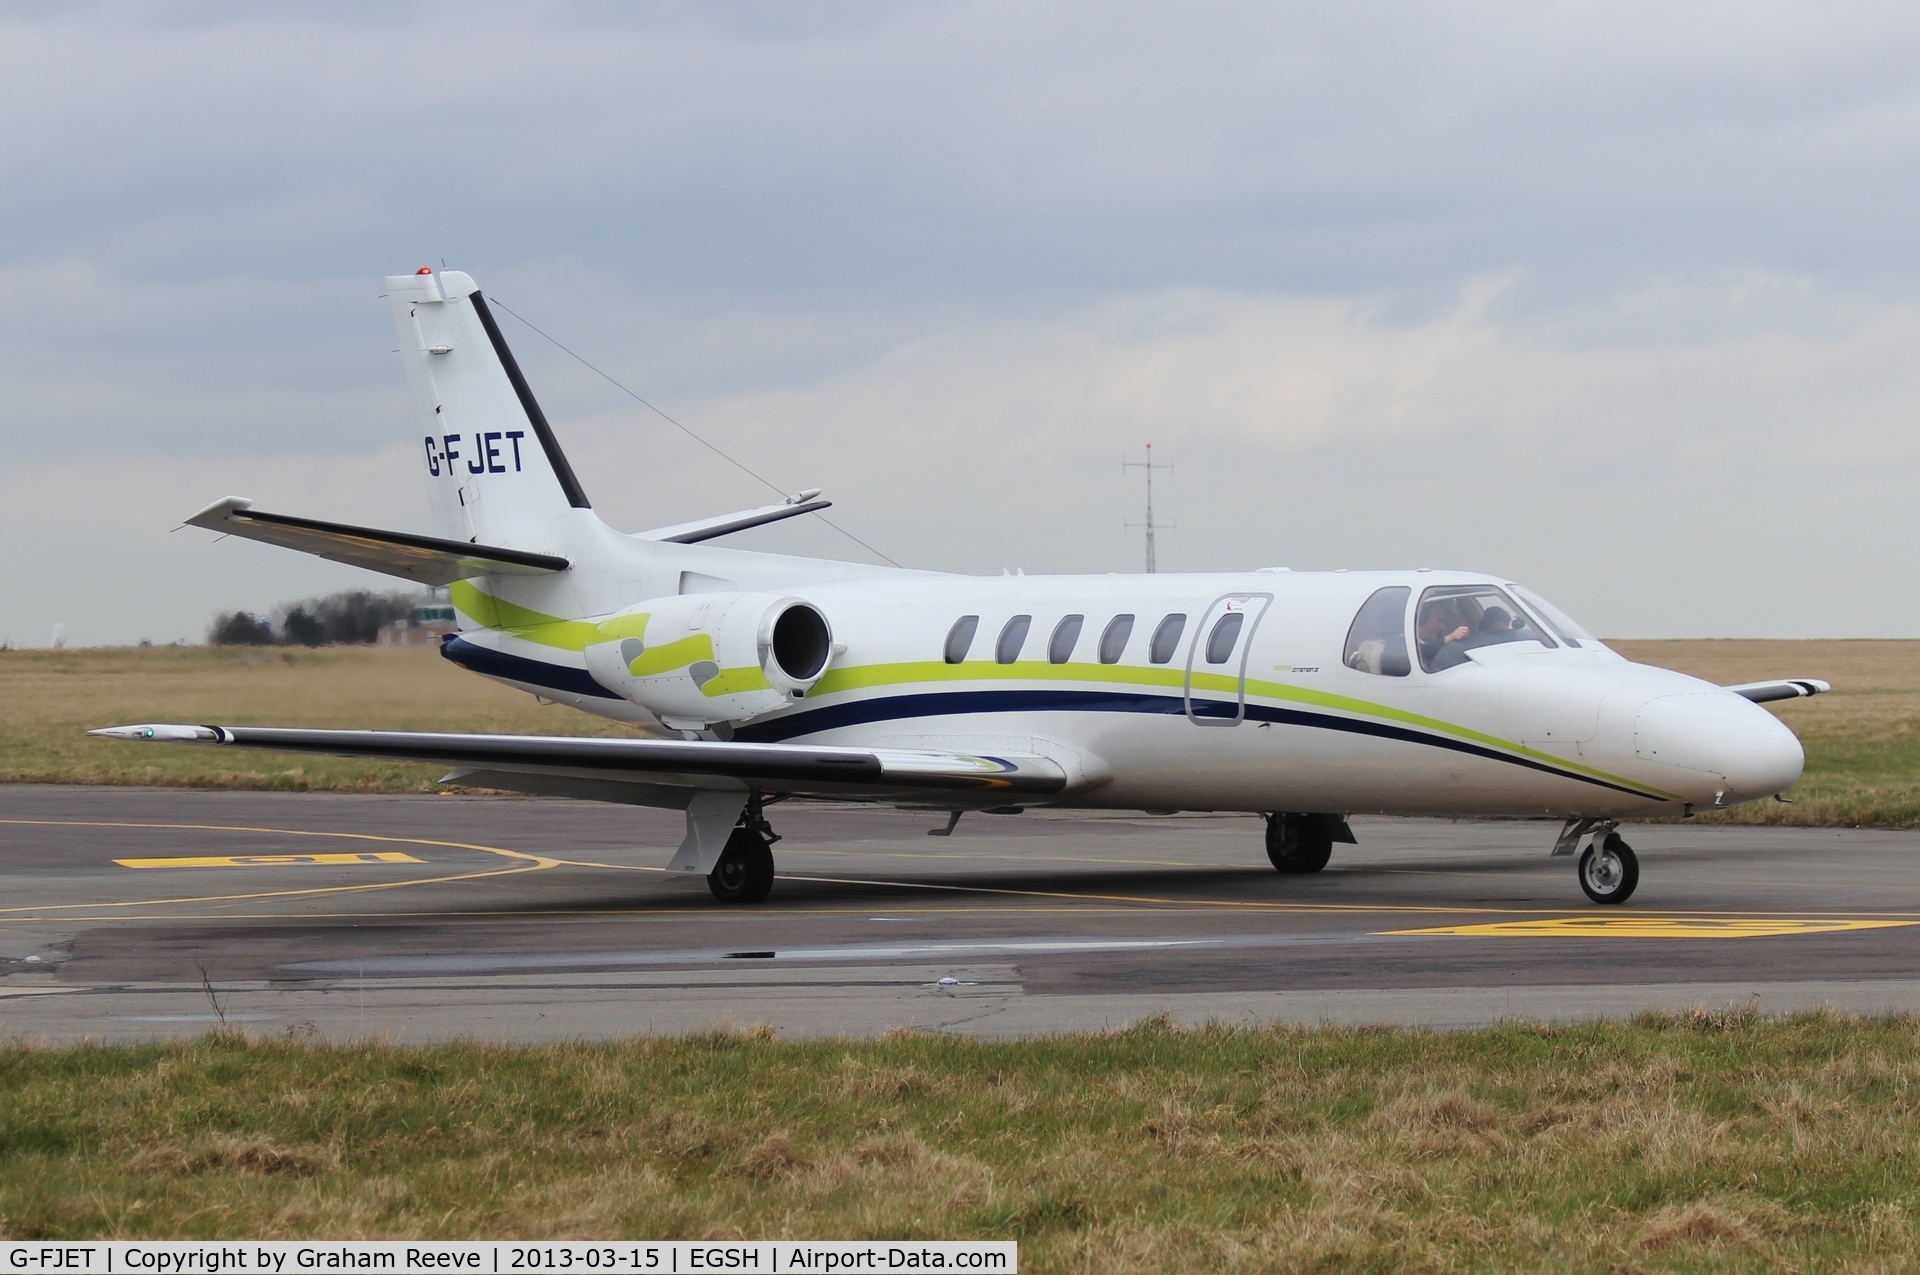 G-FJET, 1982 Cessna 550 Citation II C/N 550-0419, About to depart.